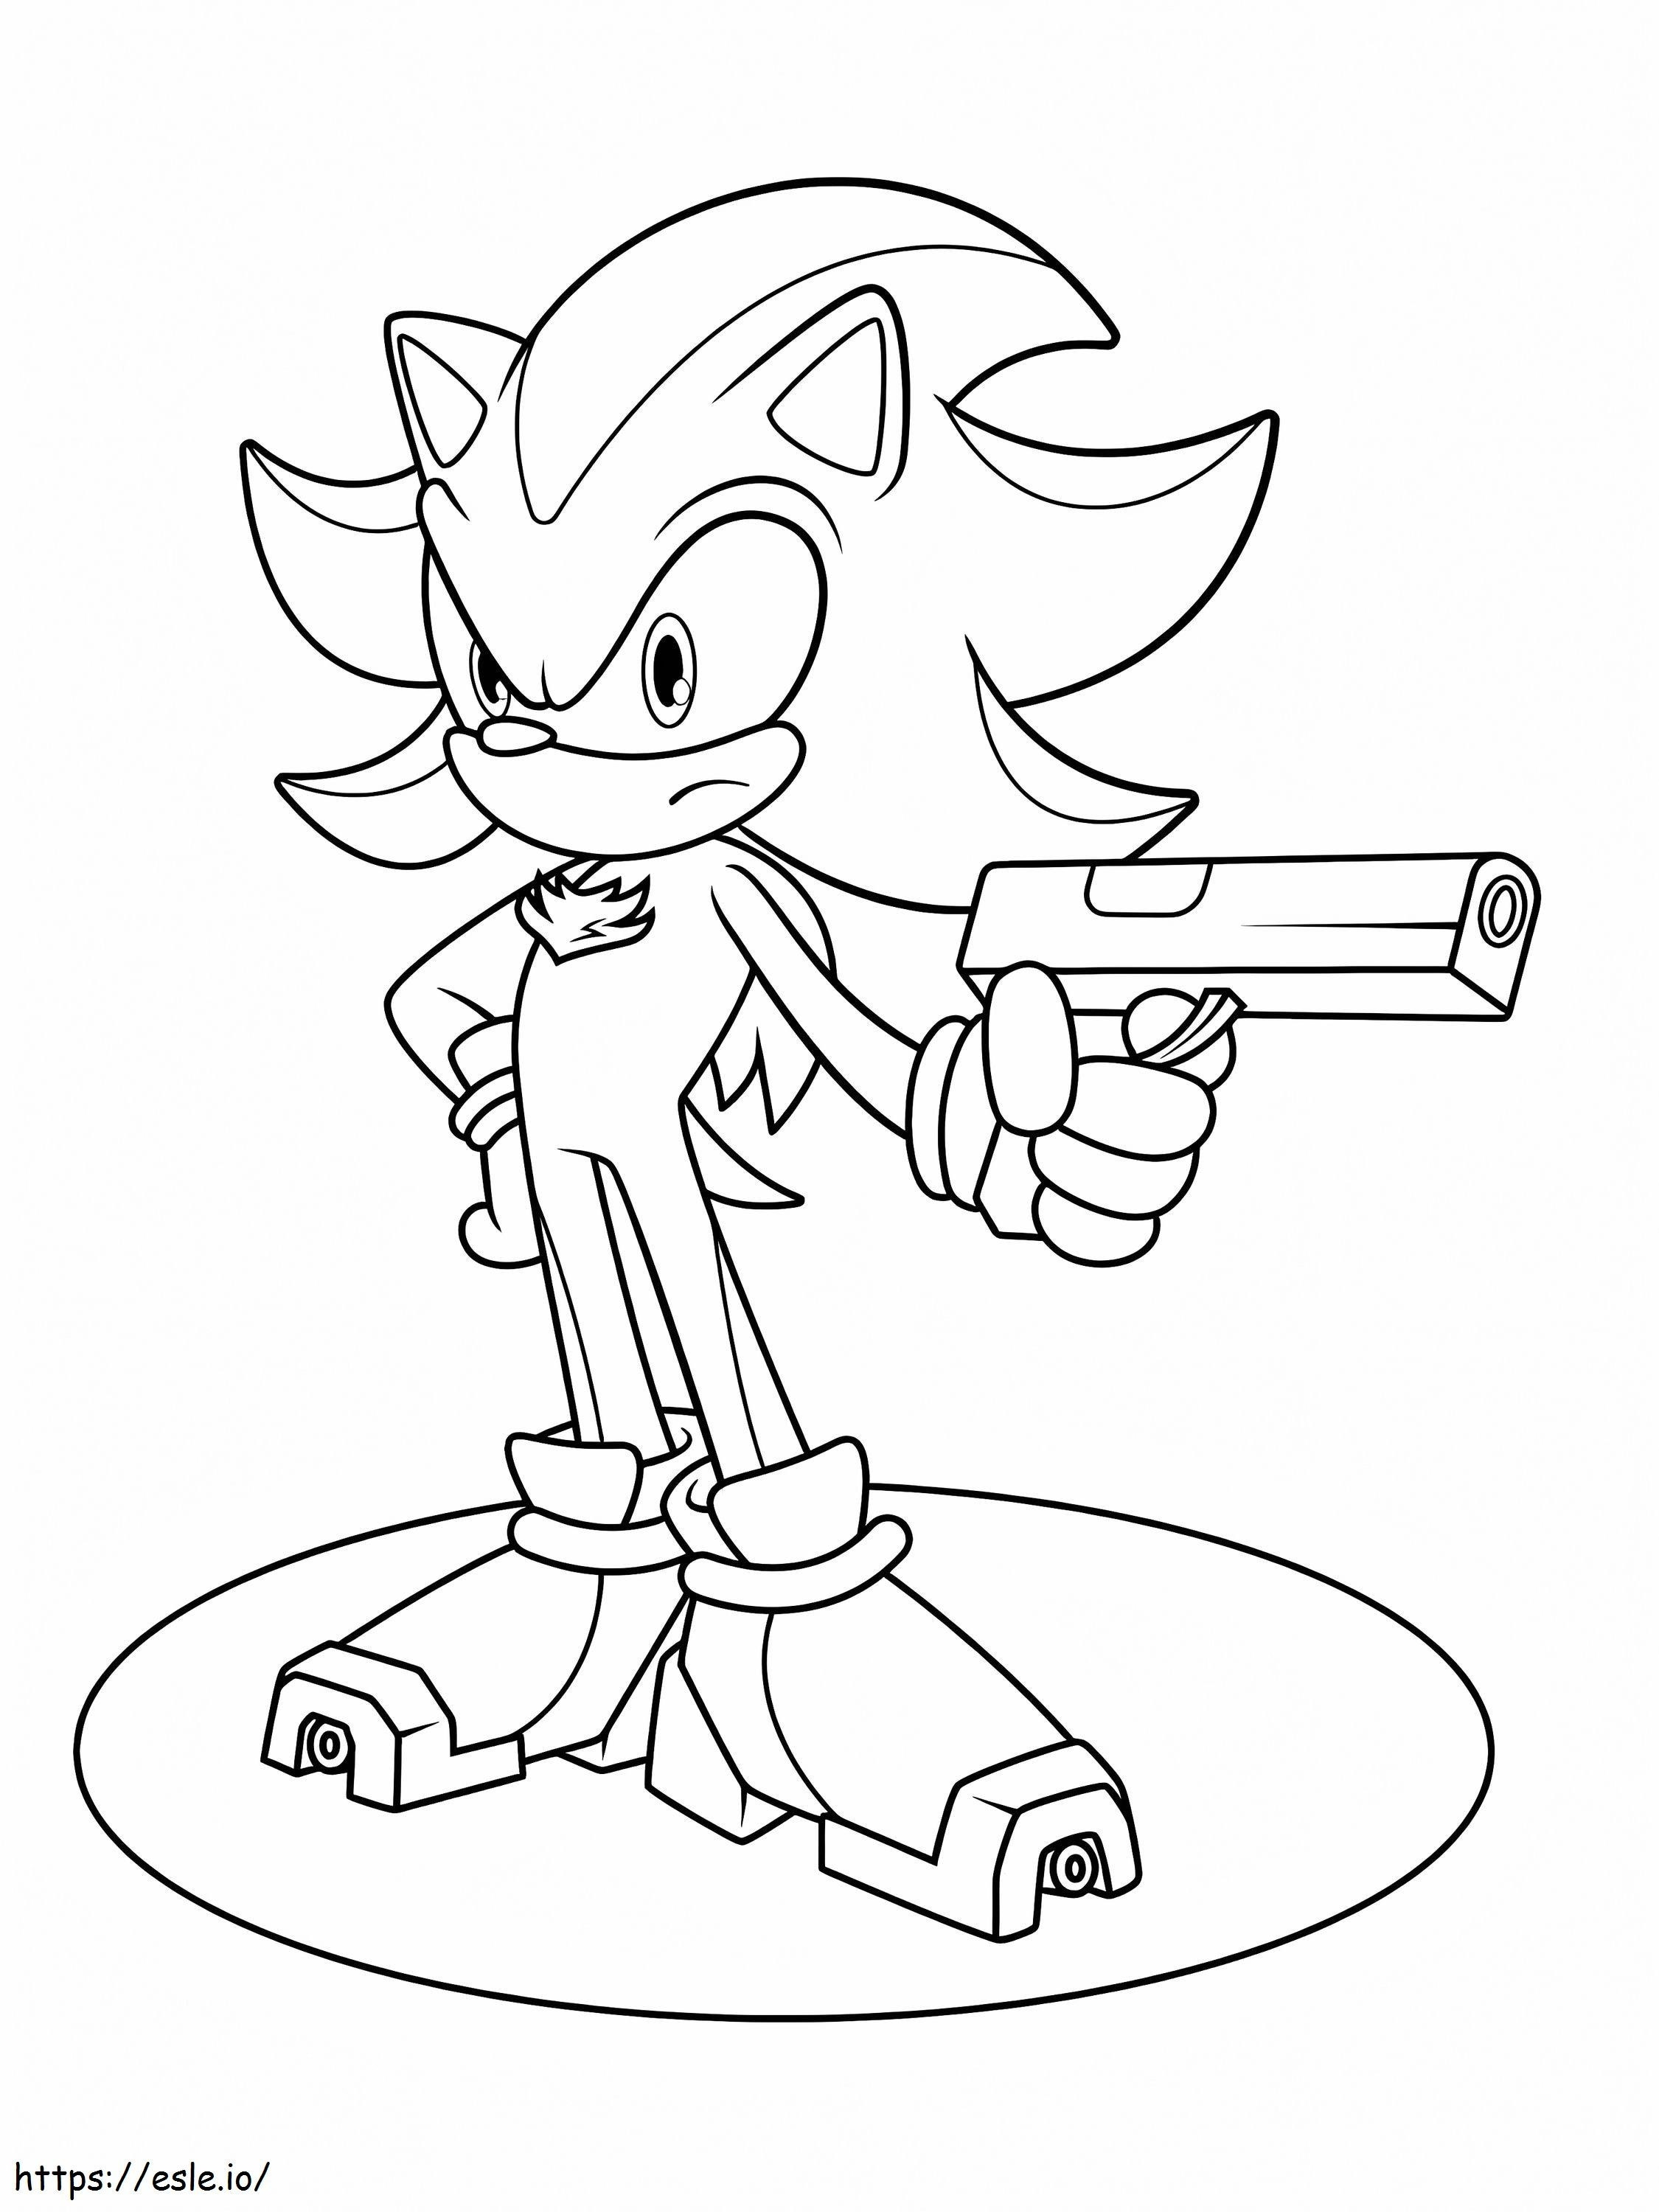 Shadow Holding A Gun coloring page